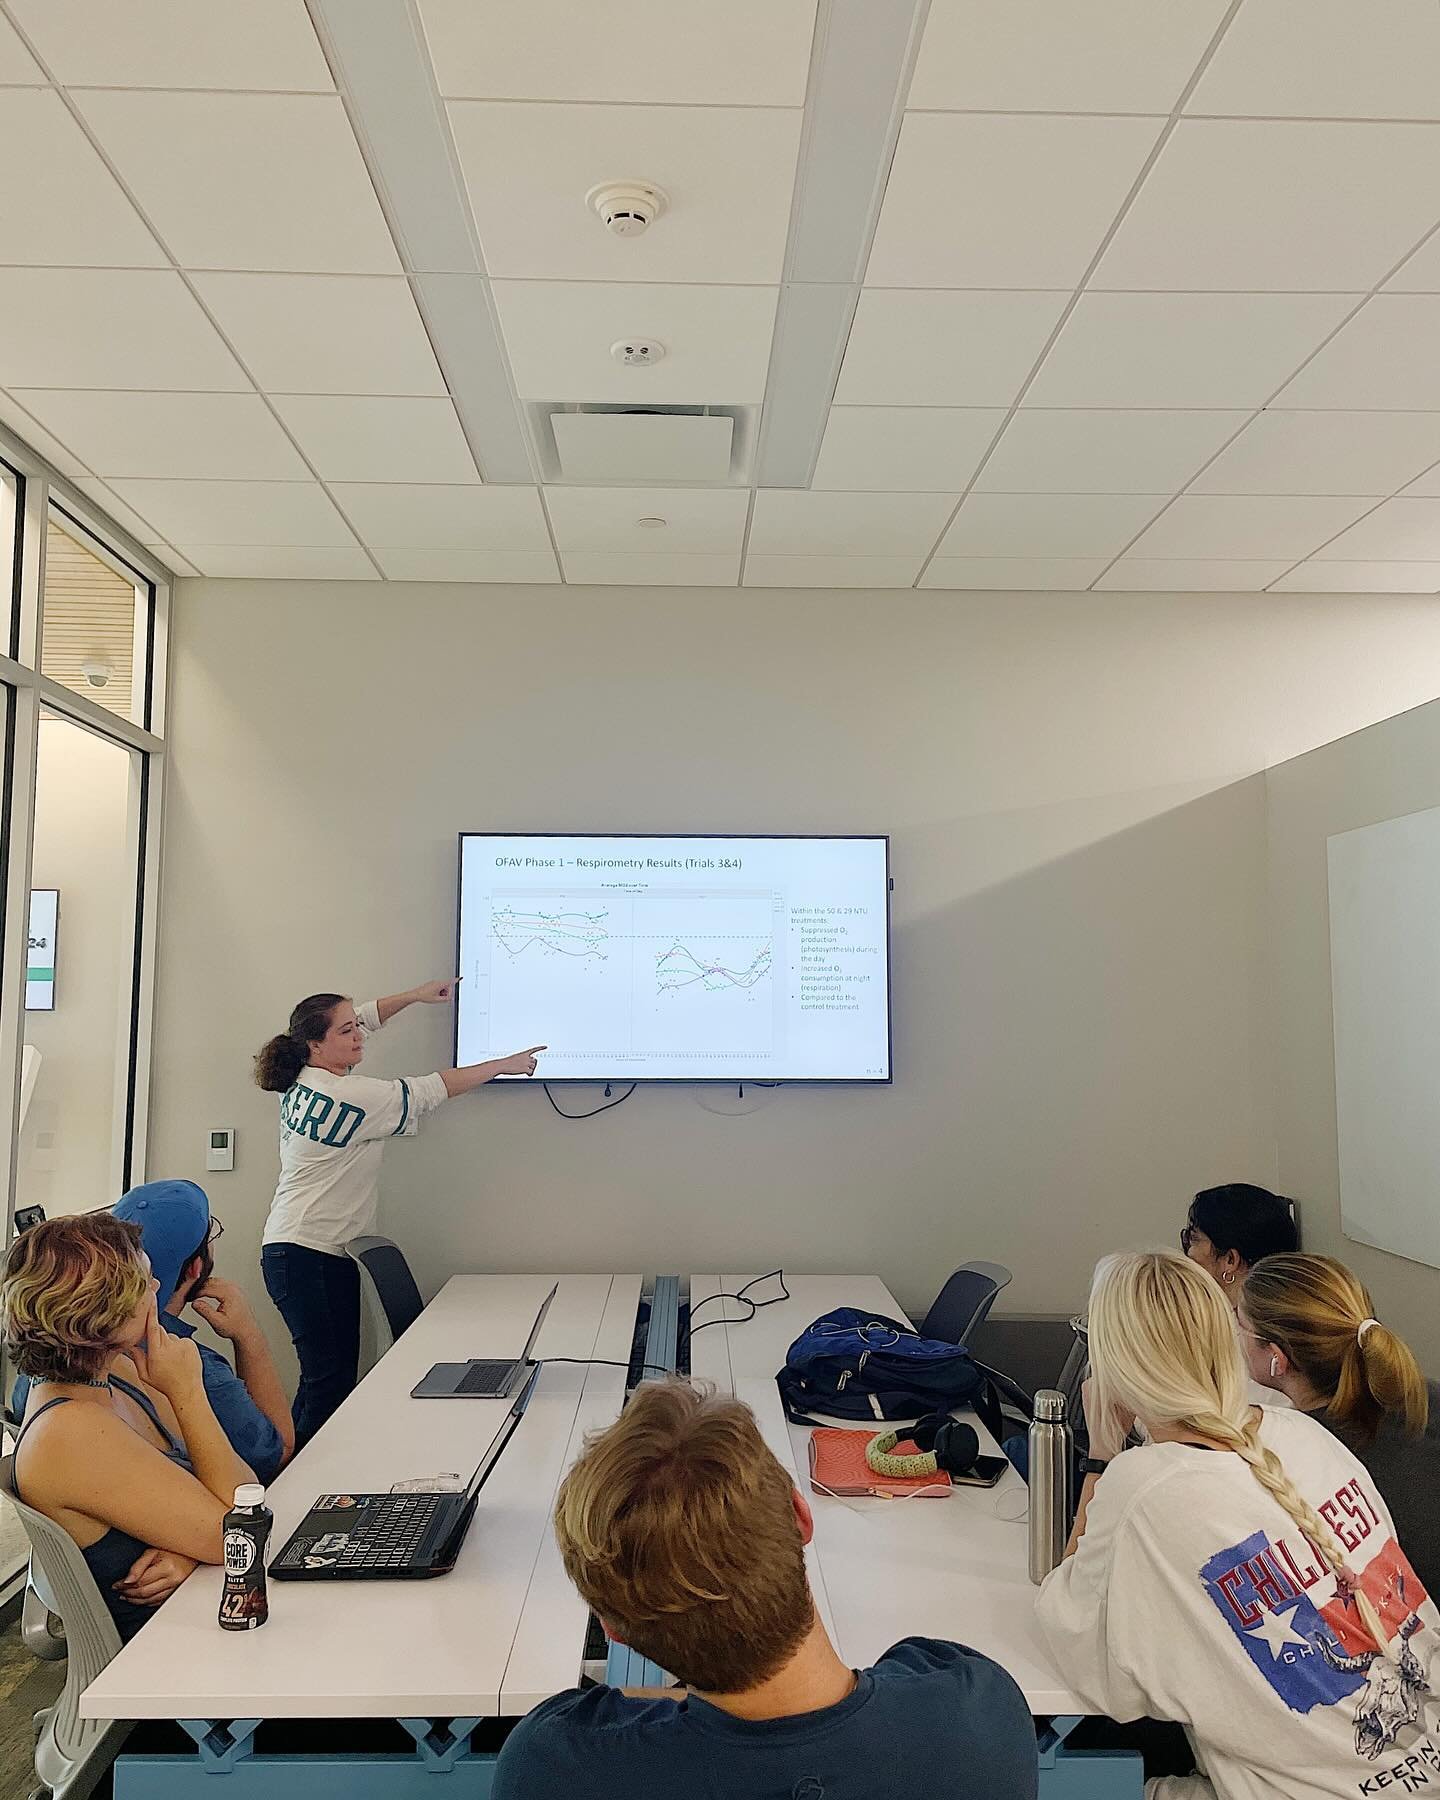 Recently, our Florida Department of Environmental Protection (FDEP) team has embarked on the workshop and writing process, compiling the results from their ongoing research! ✍🏻 📈 &nbsp; &nbsp; &nbsp; &nbsp; &nbsp; &nbsp; &nbsp; &nbsp; &nbsp; &nbsp;